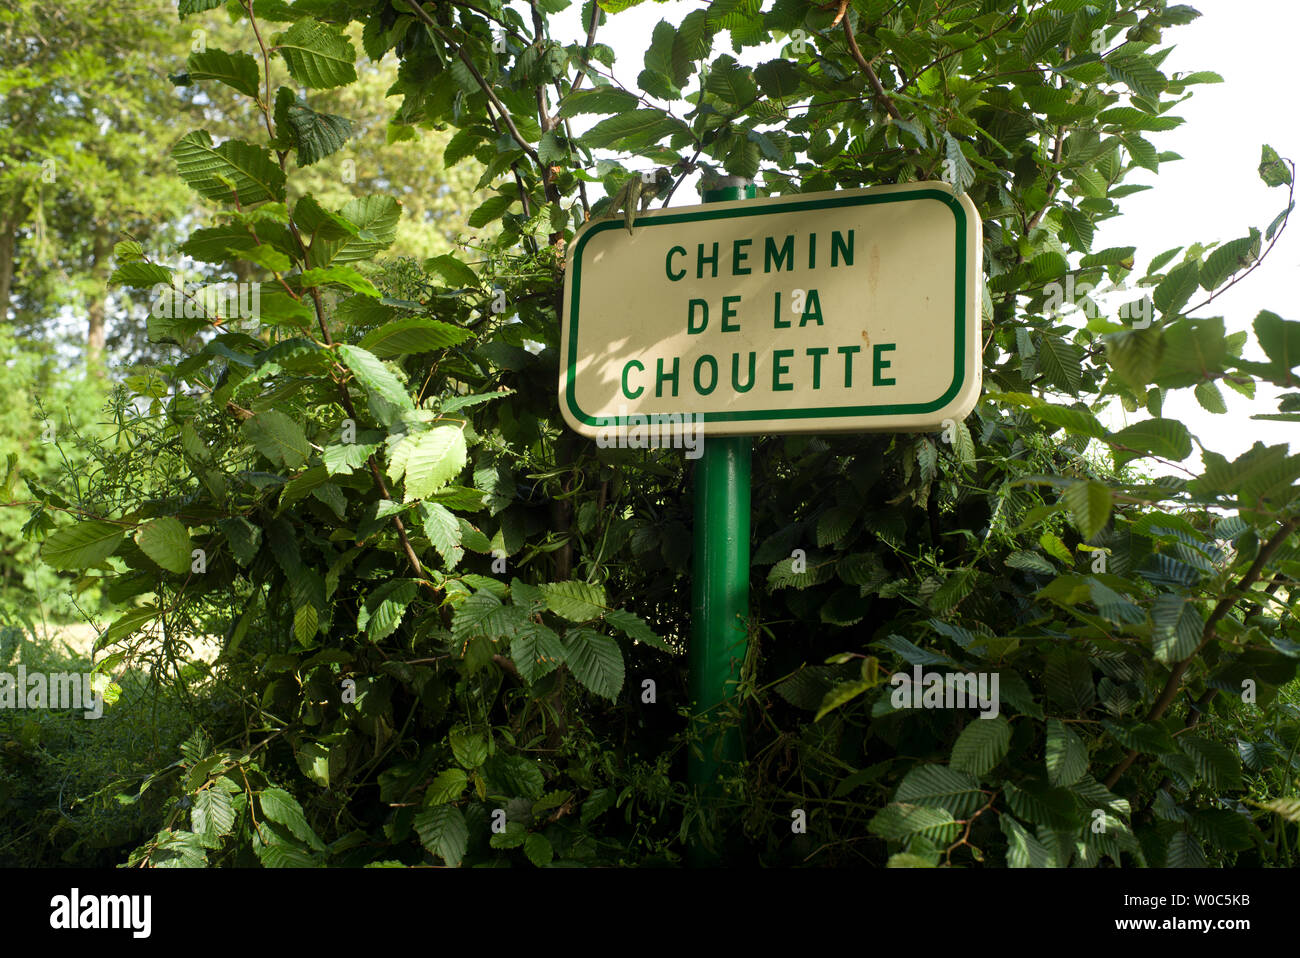 Street sign in hedge, small village, Normandy, France Stock Photo